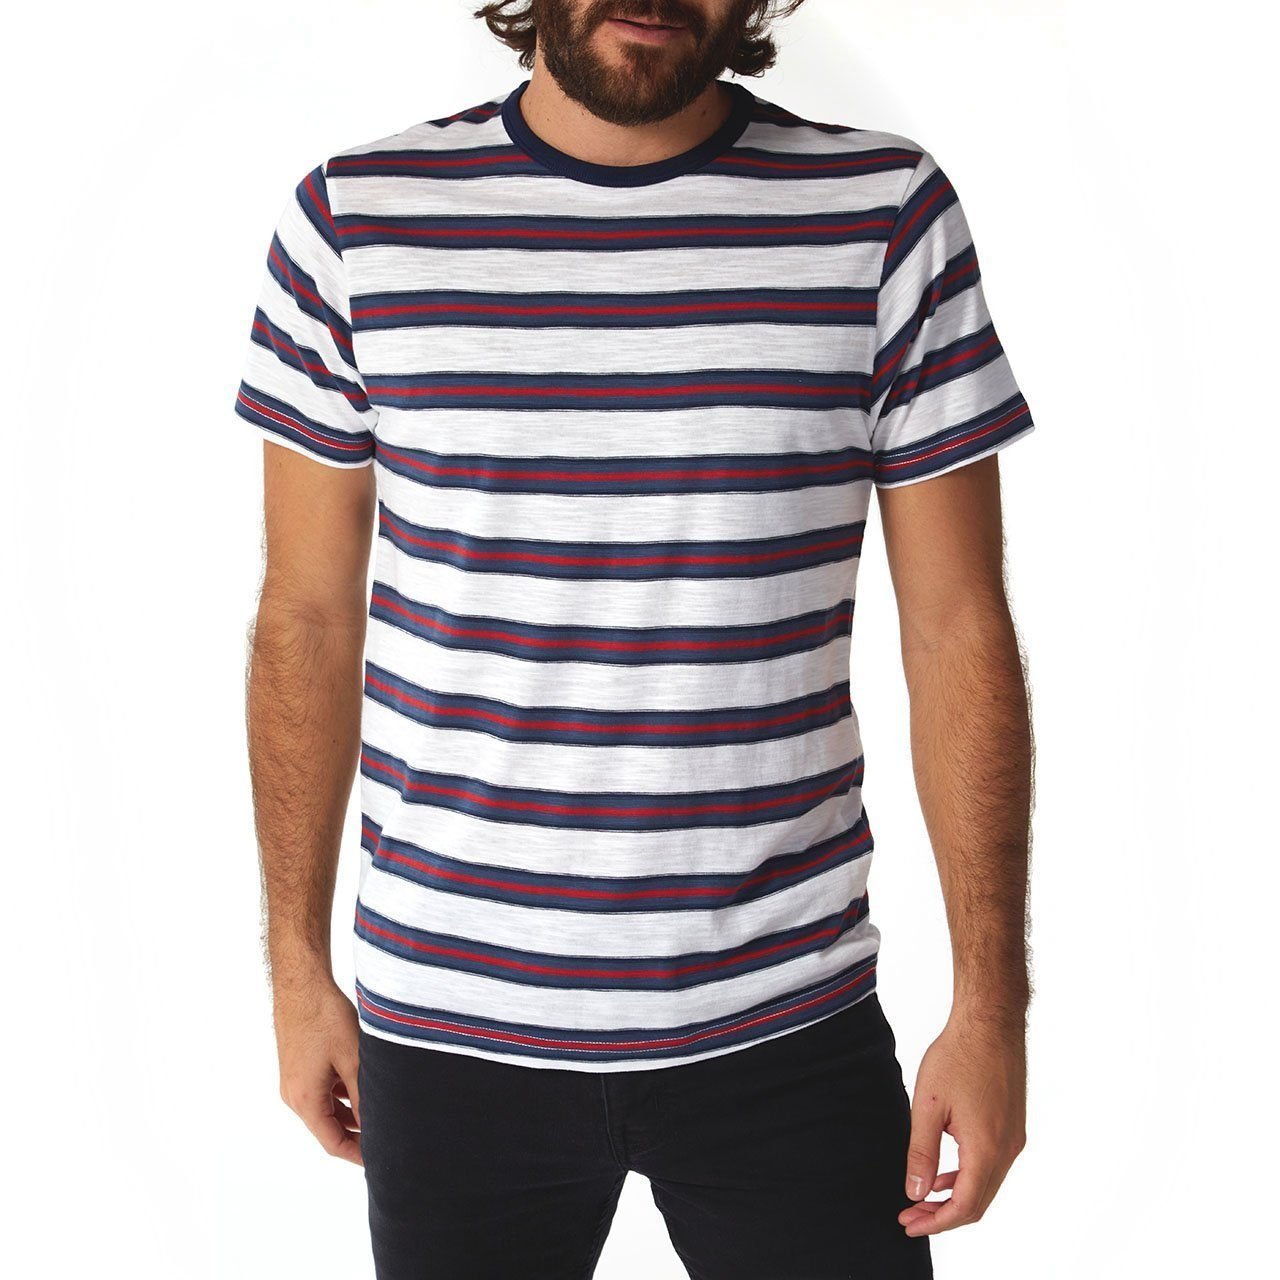 PX Clothing Men's Mateo Striped Tee